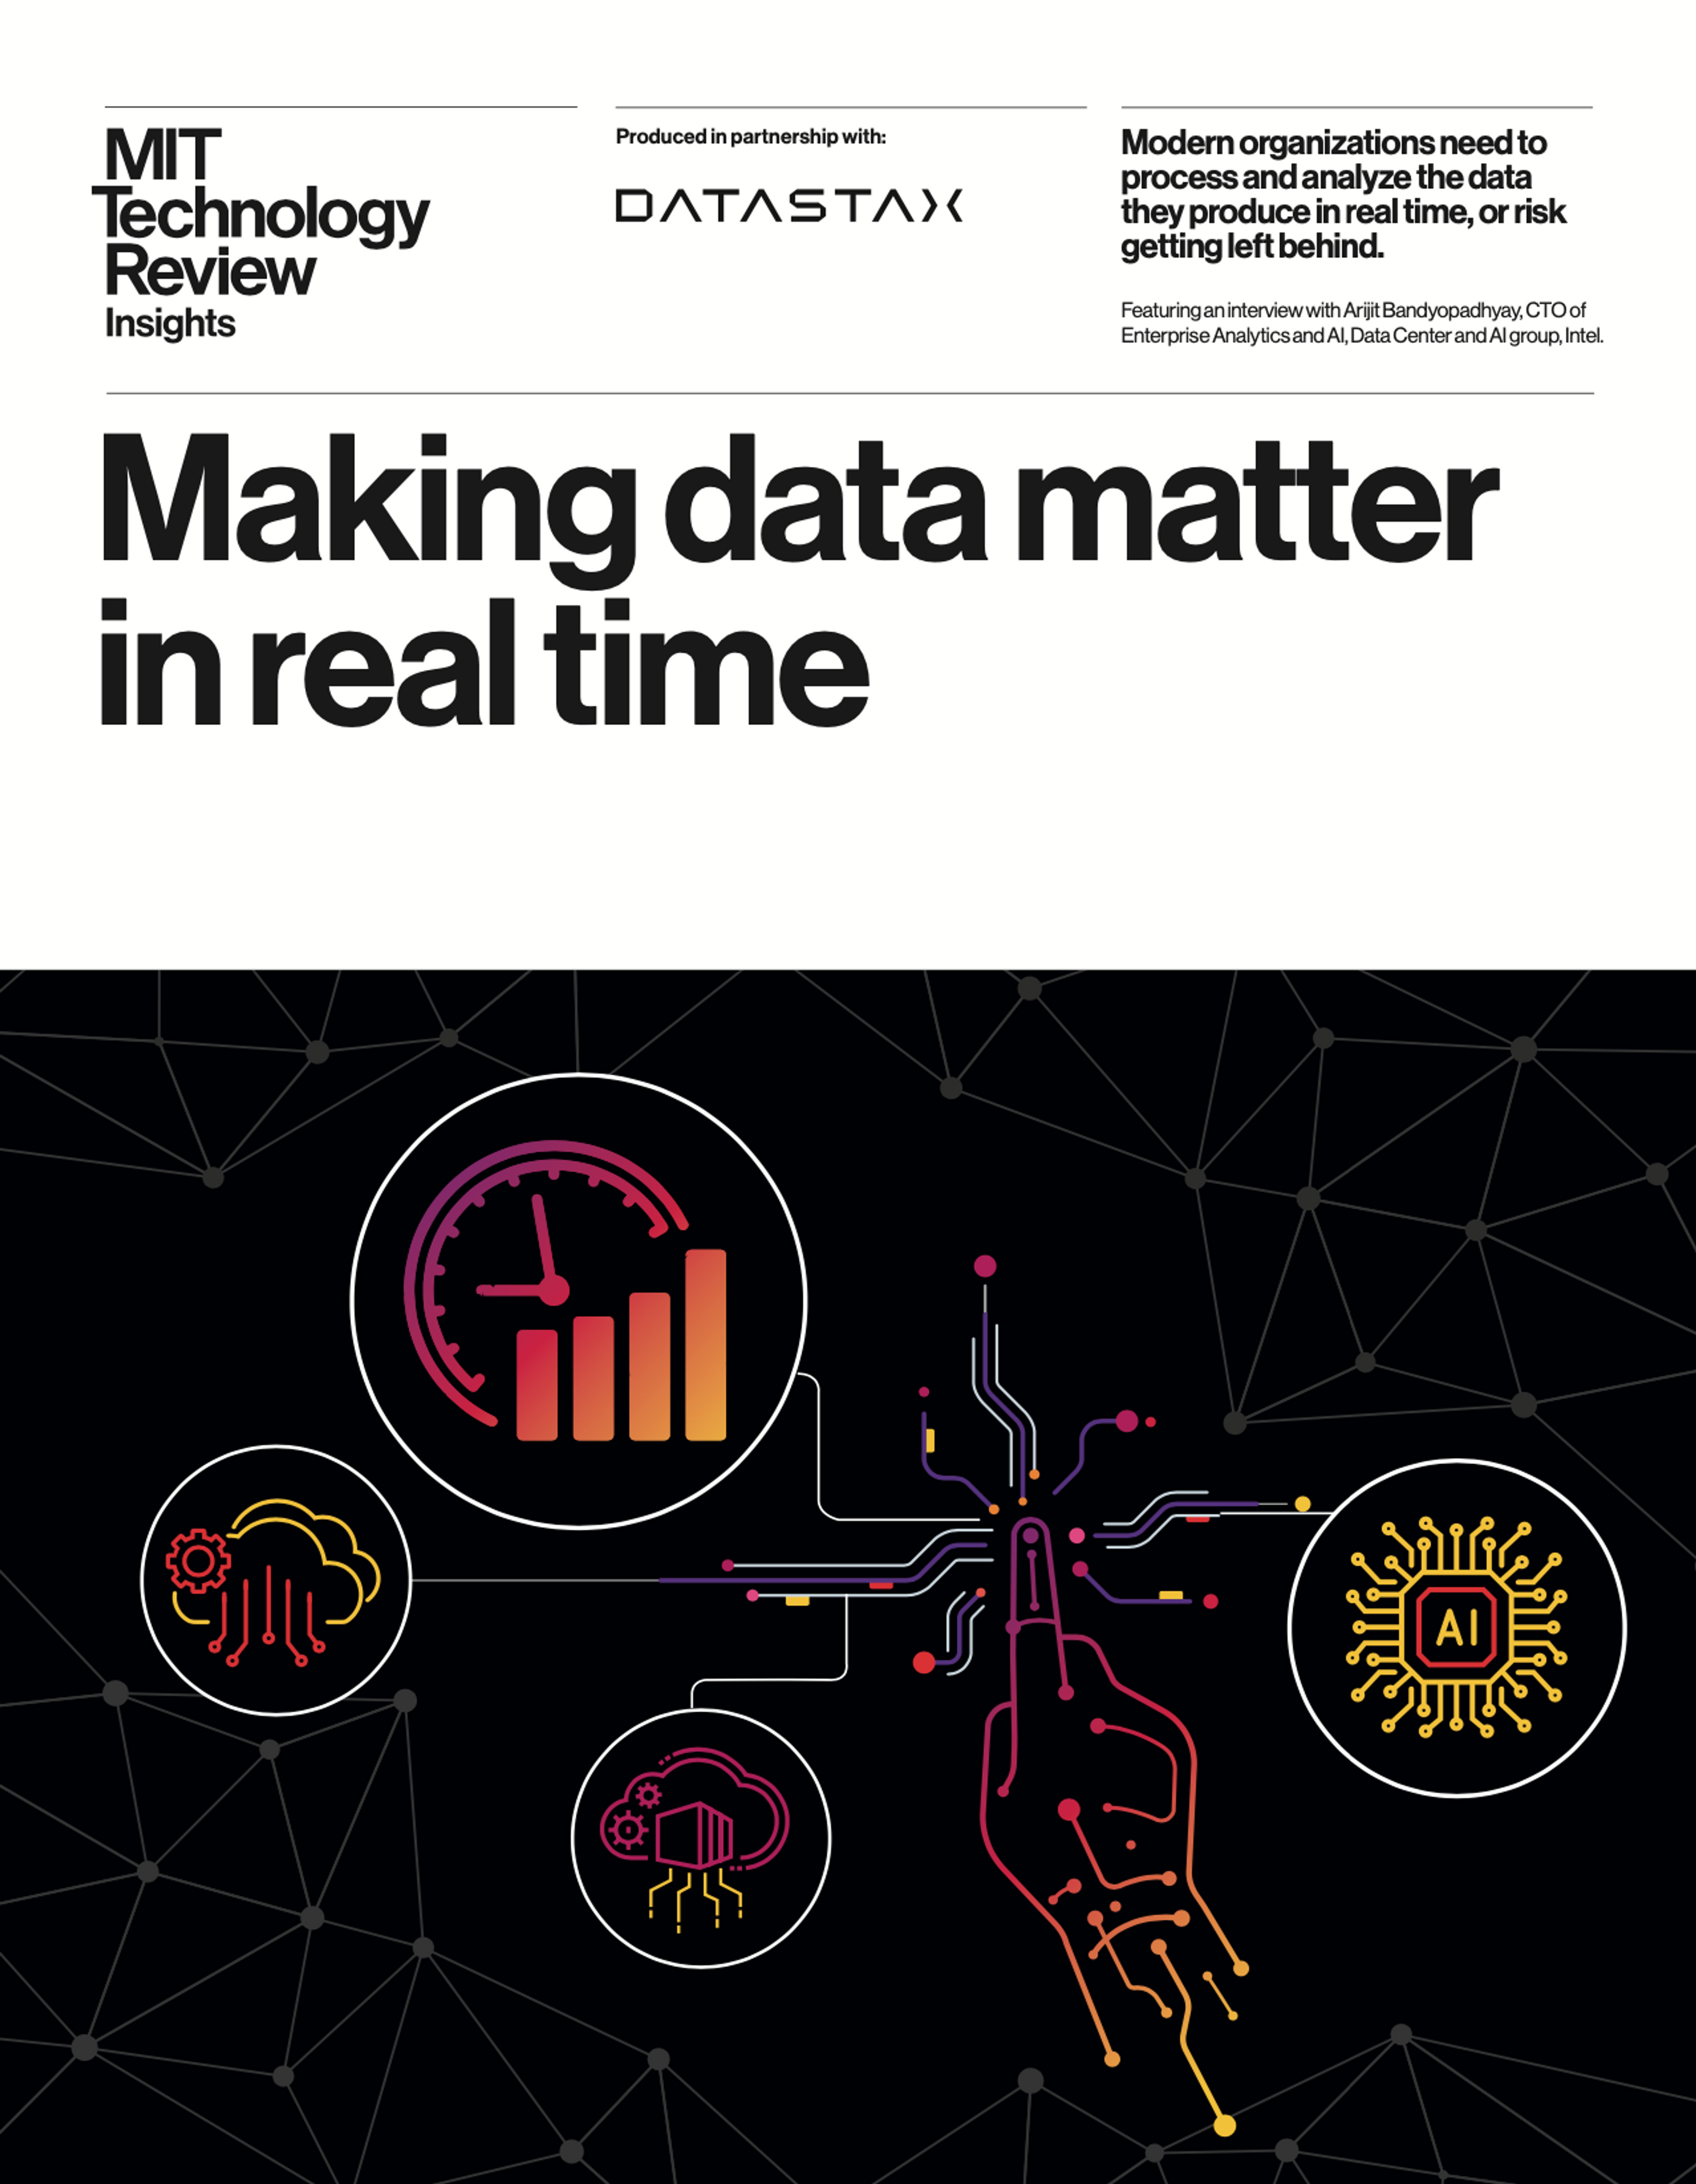 MIT Technology Review Insights Report: “Making data matter—in real time”